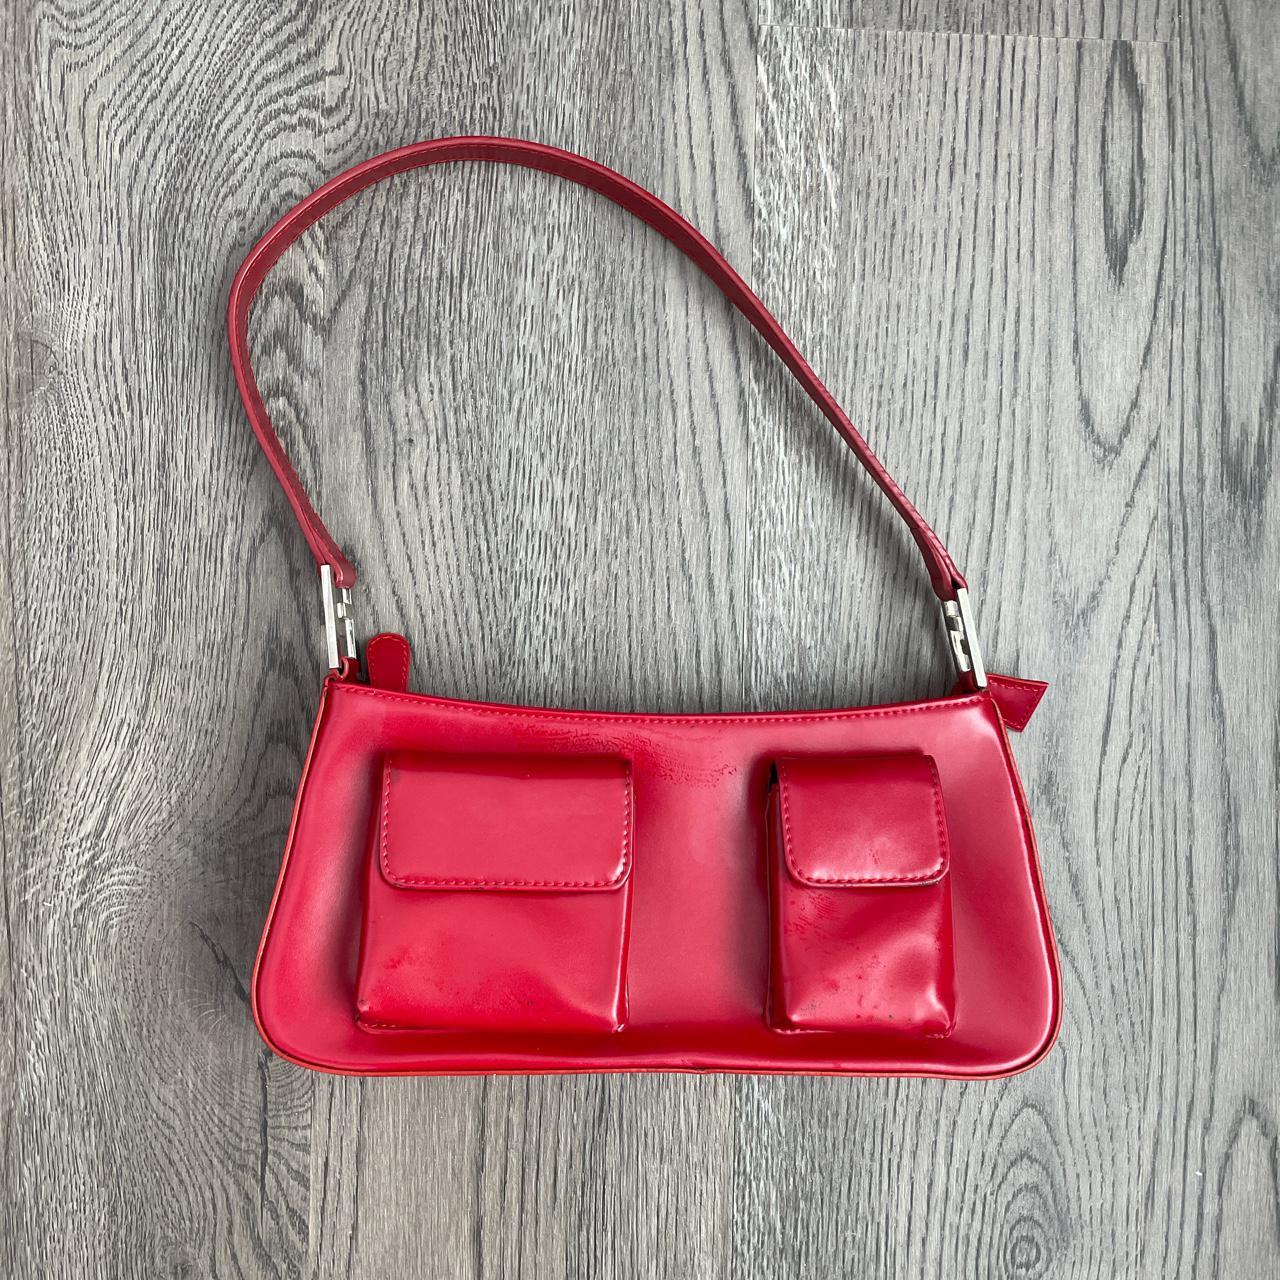 Product Image 1 - Modern red structured bag with